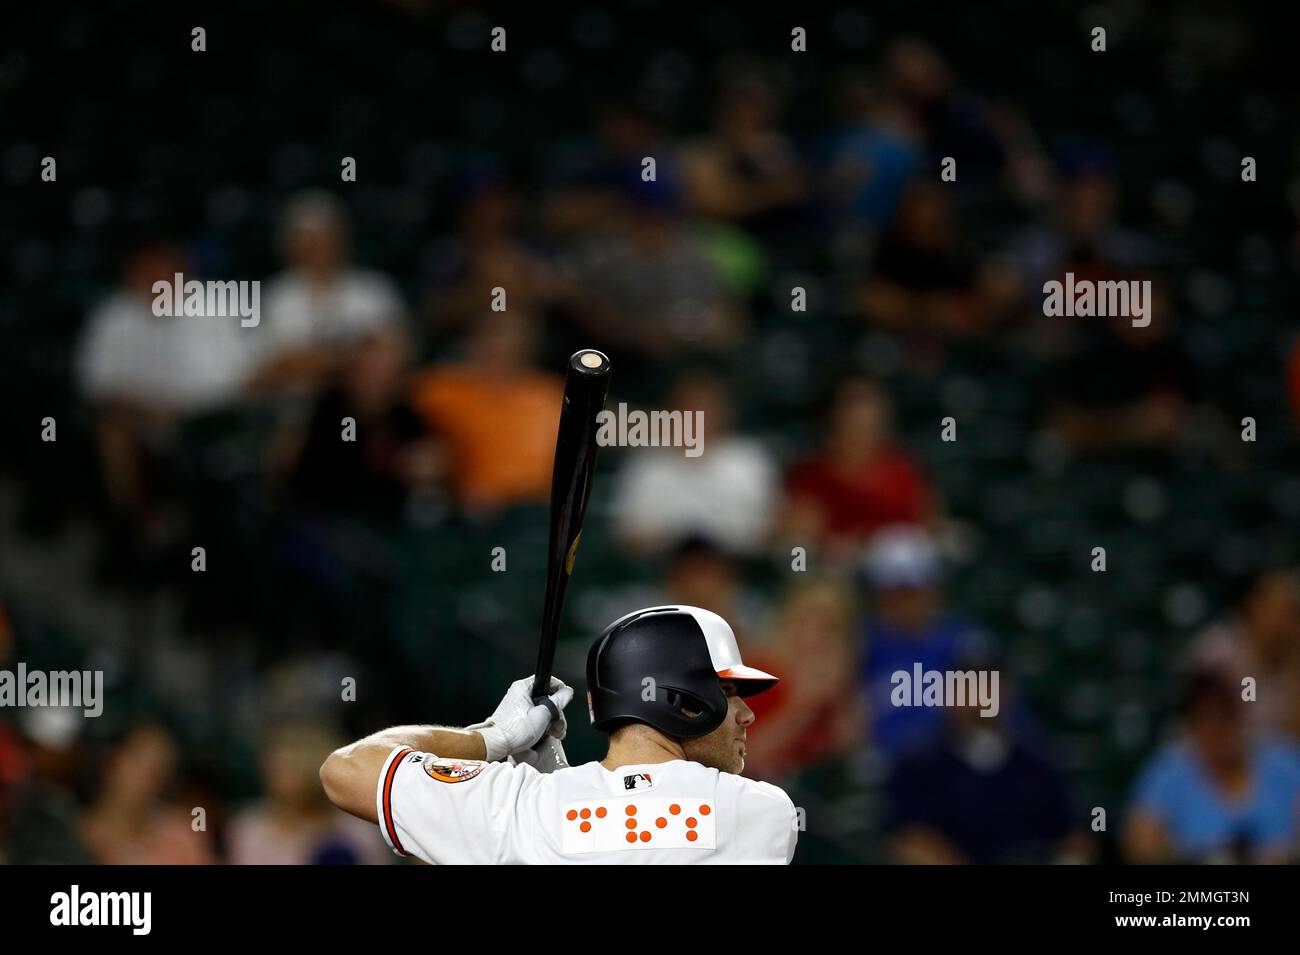 Baltimore Orioles first baseman Trey Mancini wears a jersey that features  Orioles in Braille during a baseball game against the Toronto Blue Jays,  Tuesday, Sept. 18, 2018, in Baltimore. (AP Photo/Patrick Semansky